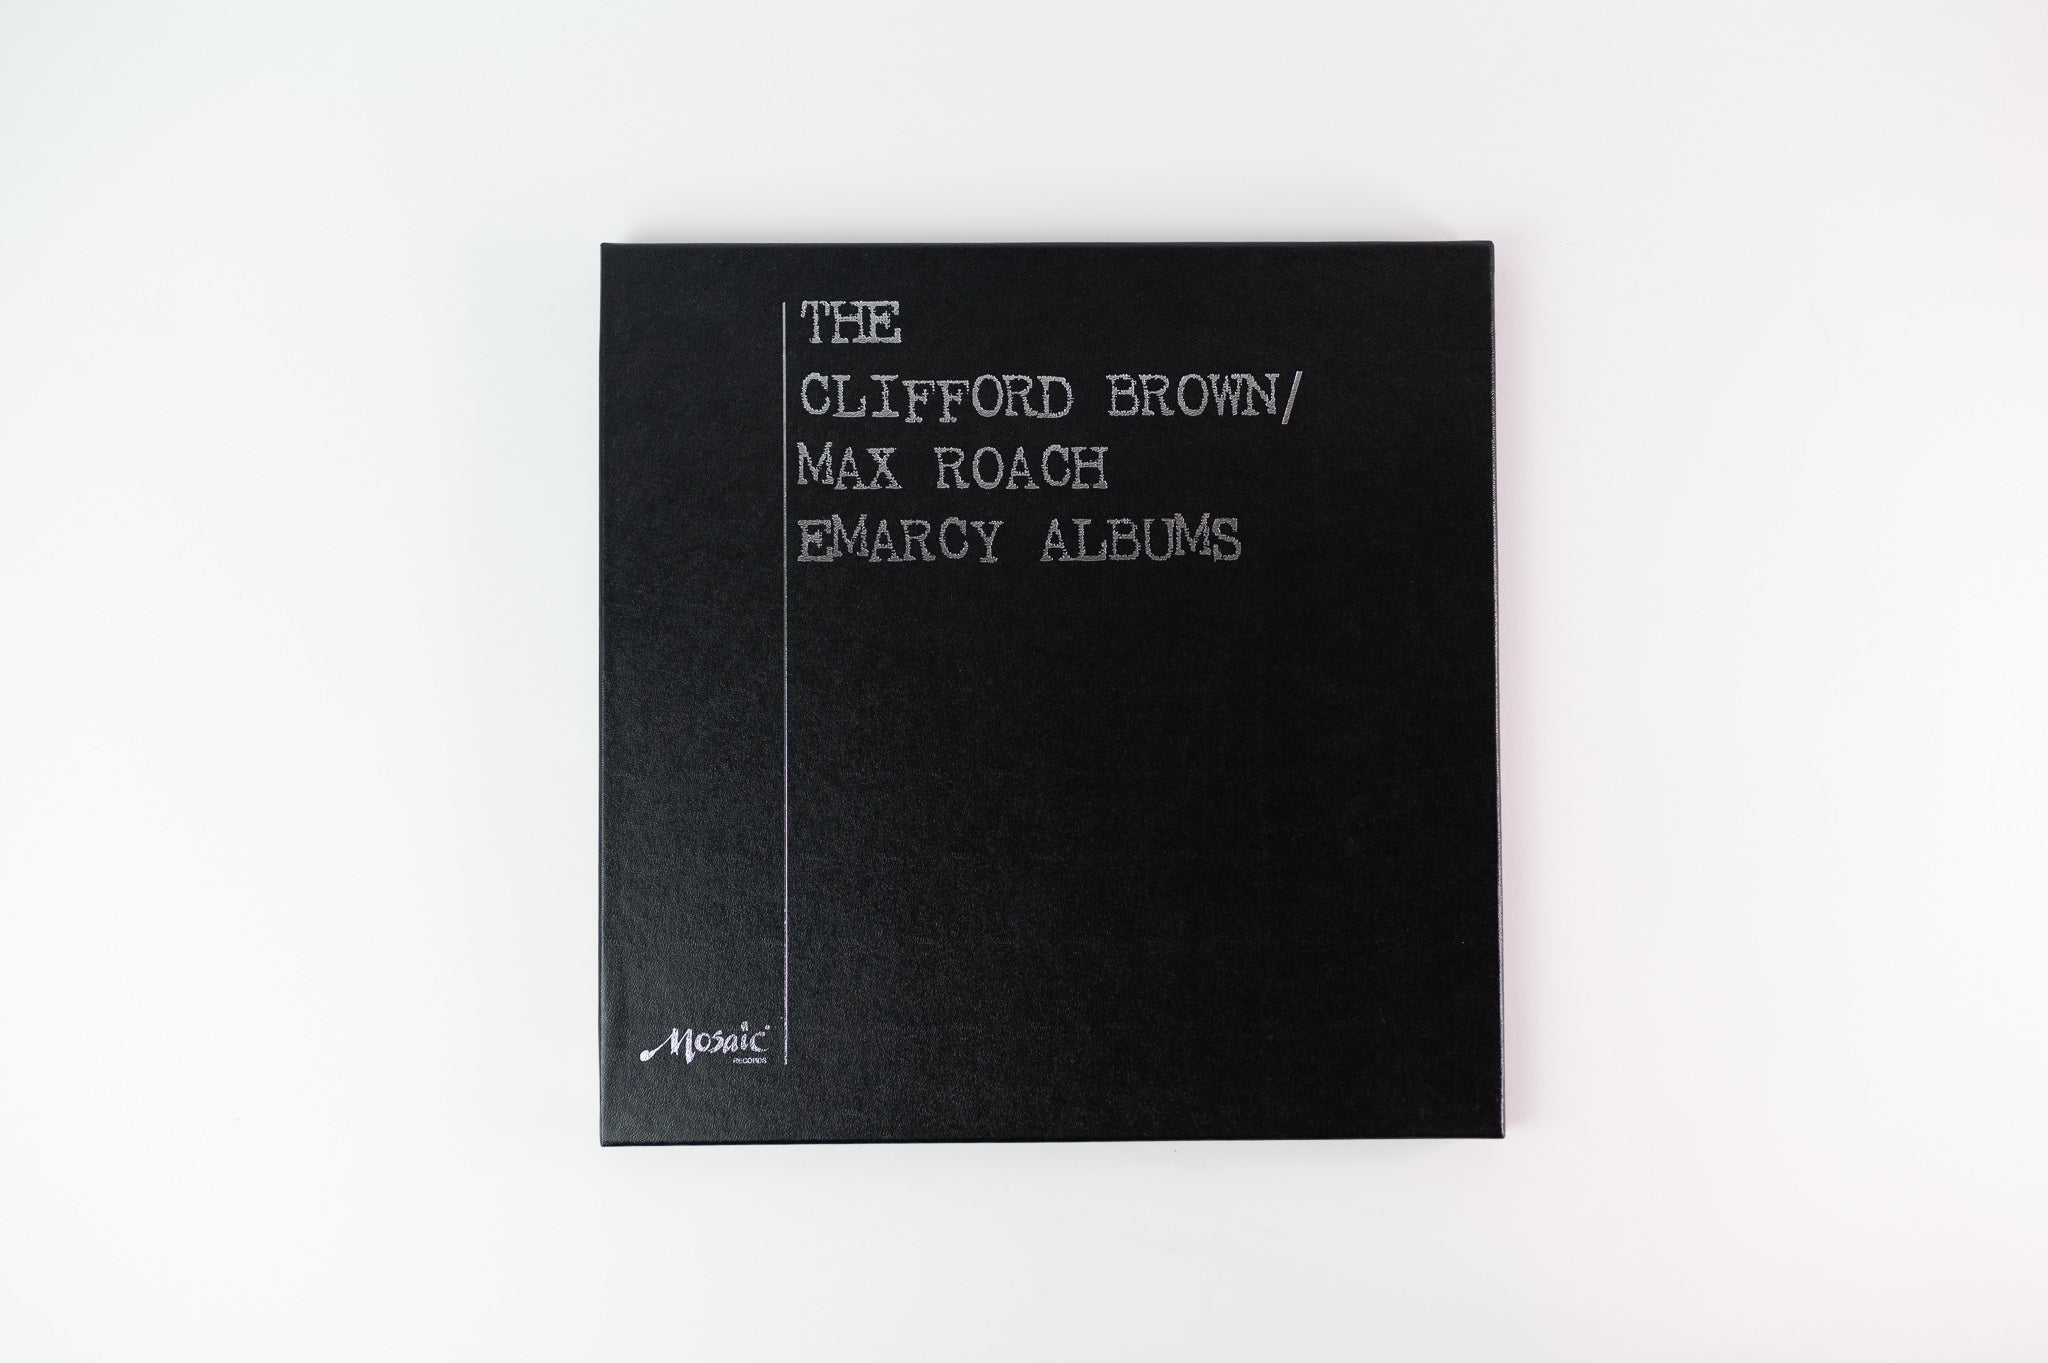 Clifford Brown And Max Roach - The Clifford Brown / Max Roach Emarcy Albums on Mosaic - 4-lp Box Set